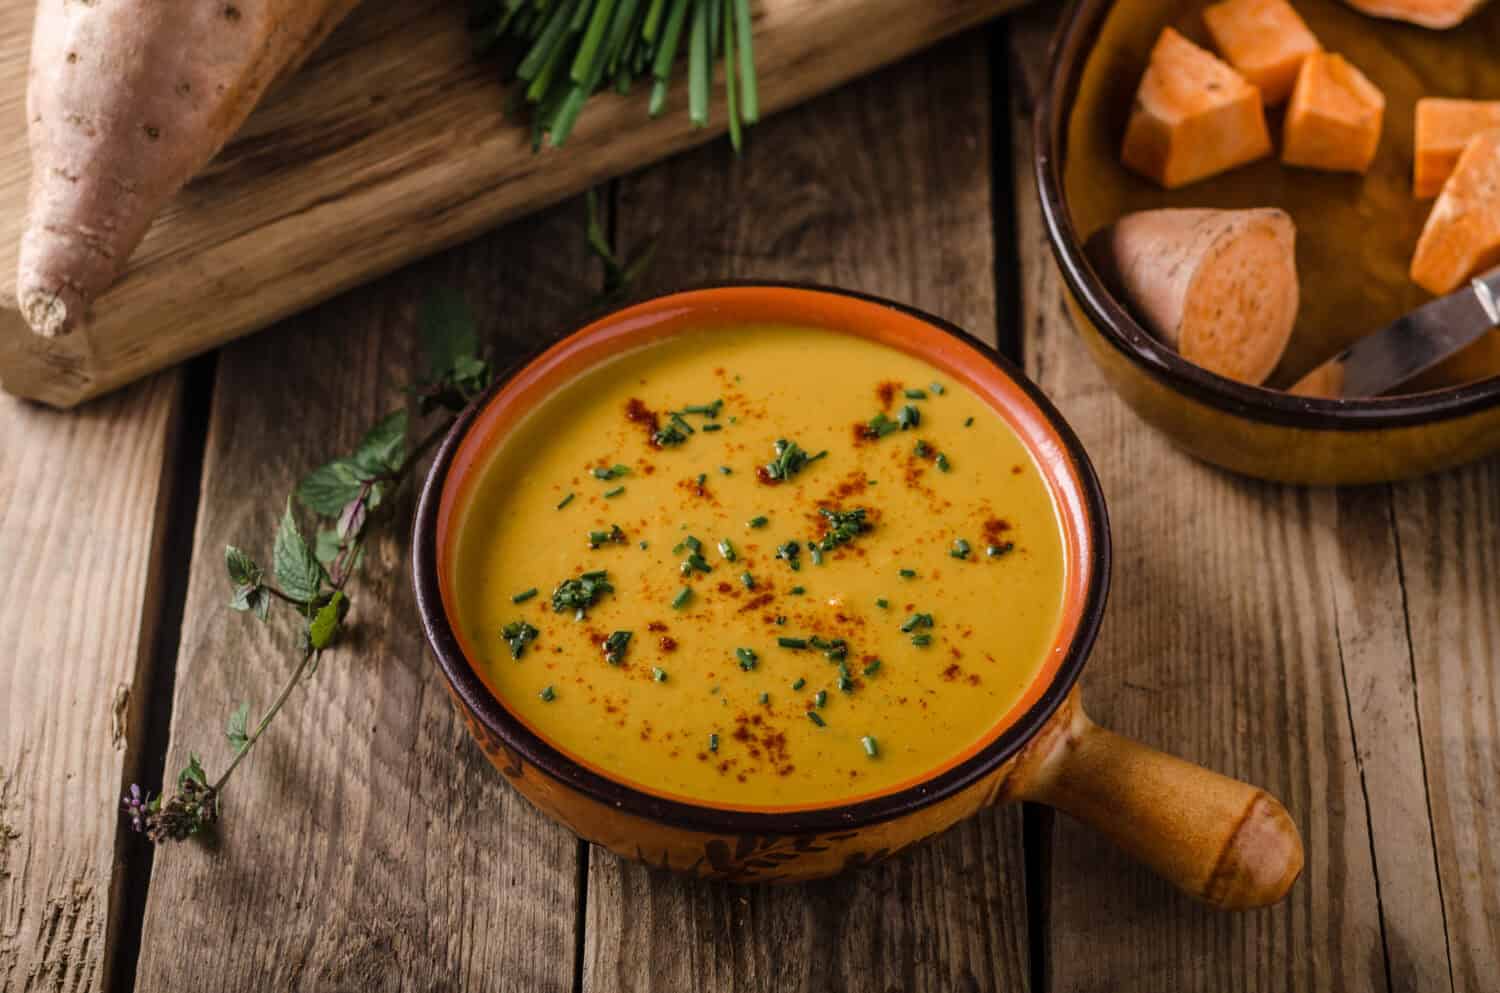 Sweet potato soup with herbs, chilli and garlic